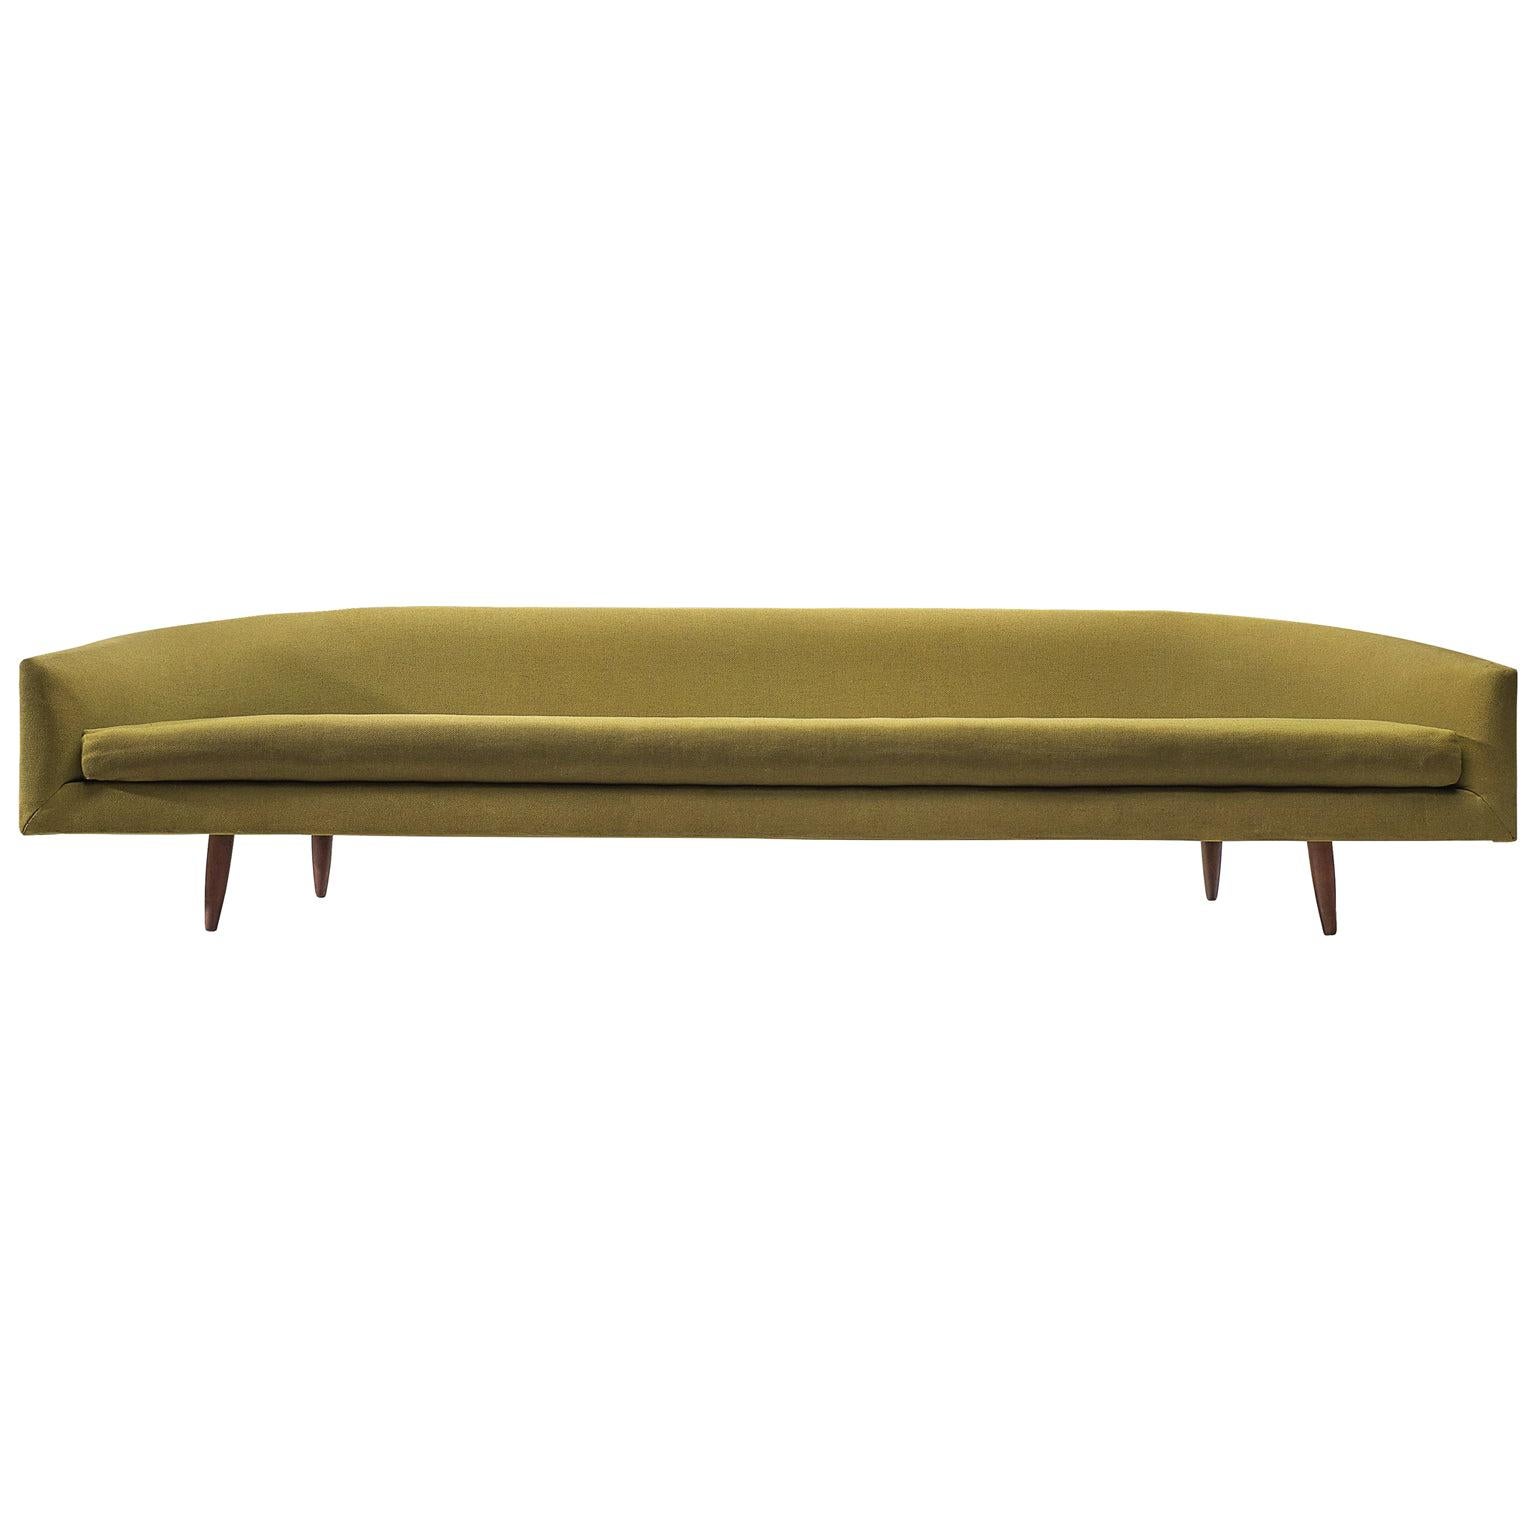 Adrian Pearsall Grand 'Cloud' Sofa in Green Upholstery